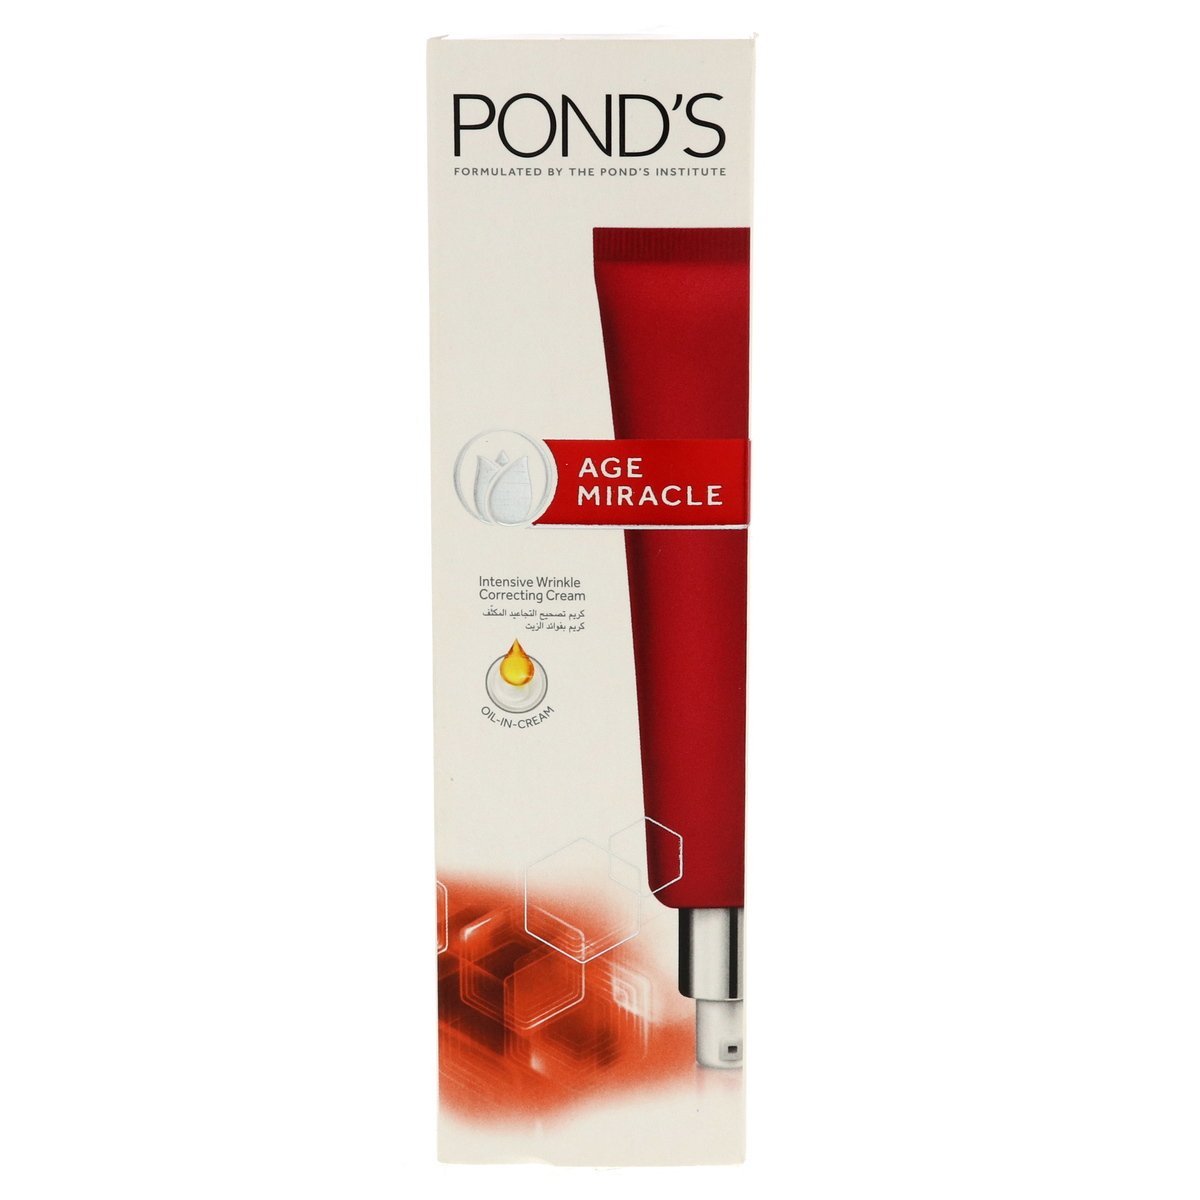 Ponds Age Miracle Intensive Wrinkle Correcting Cream 50 ml